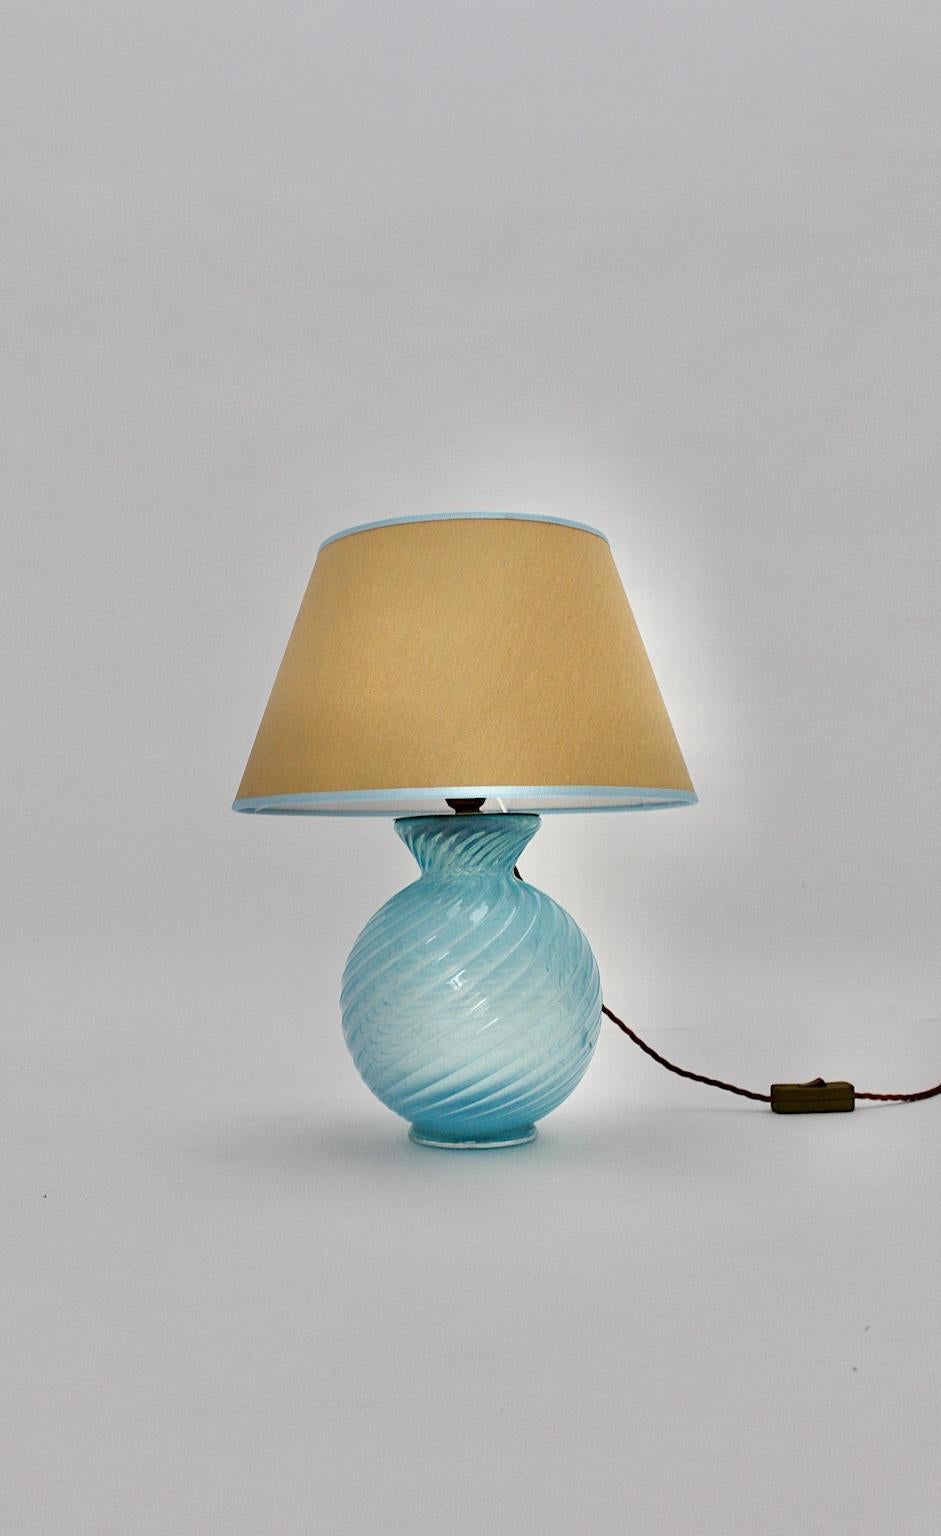 Mid Century Modern vintage pastel blue table lamp from hand made glass Barovier & Toso with a replaced lamp shade from golden fabric, Italy 190s.
A delicate and high-quality soft pastel blue vintage glass table lamp by Barovier & Toso, Italy with a